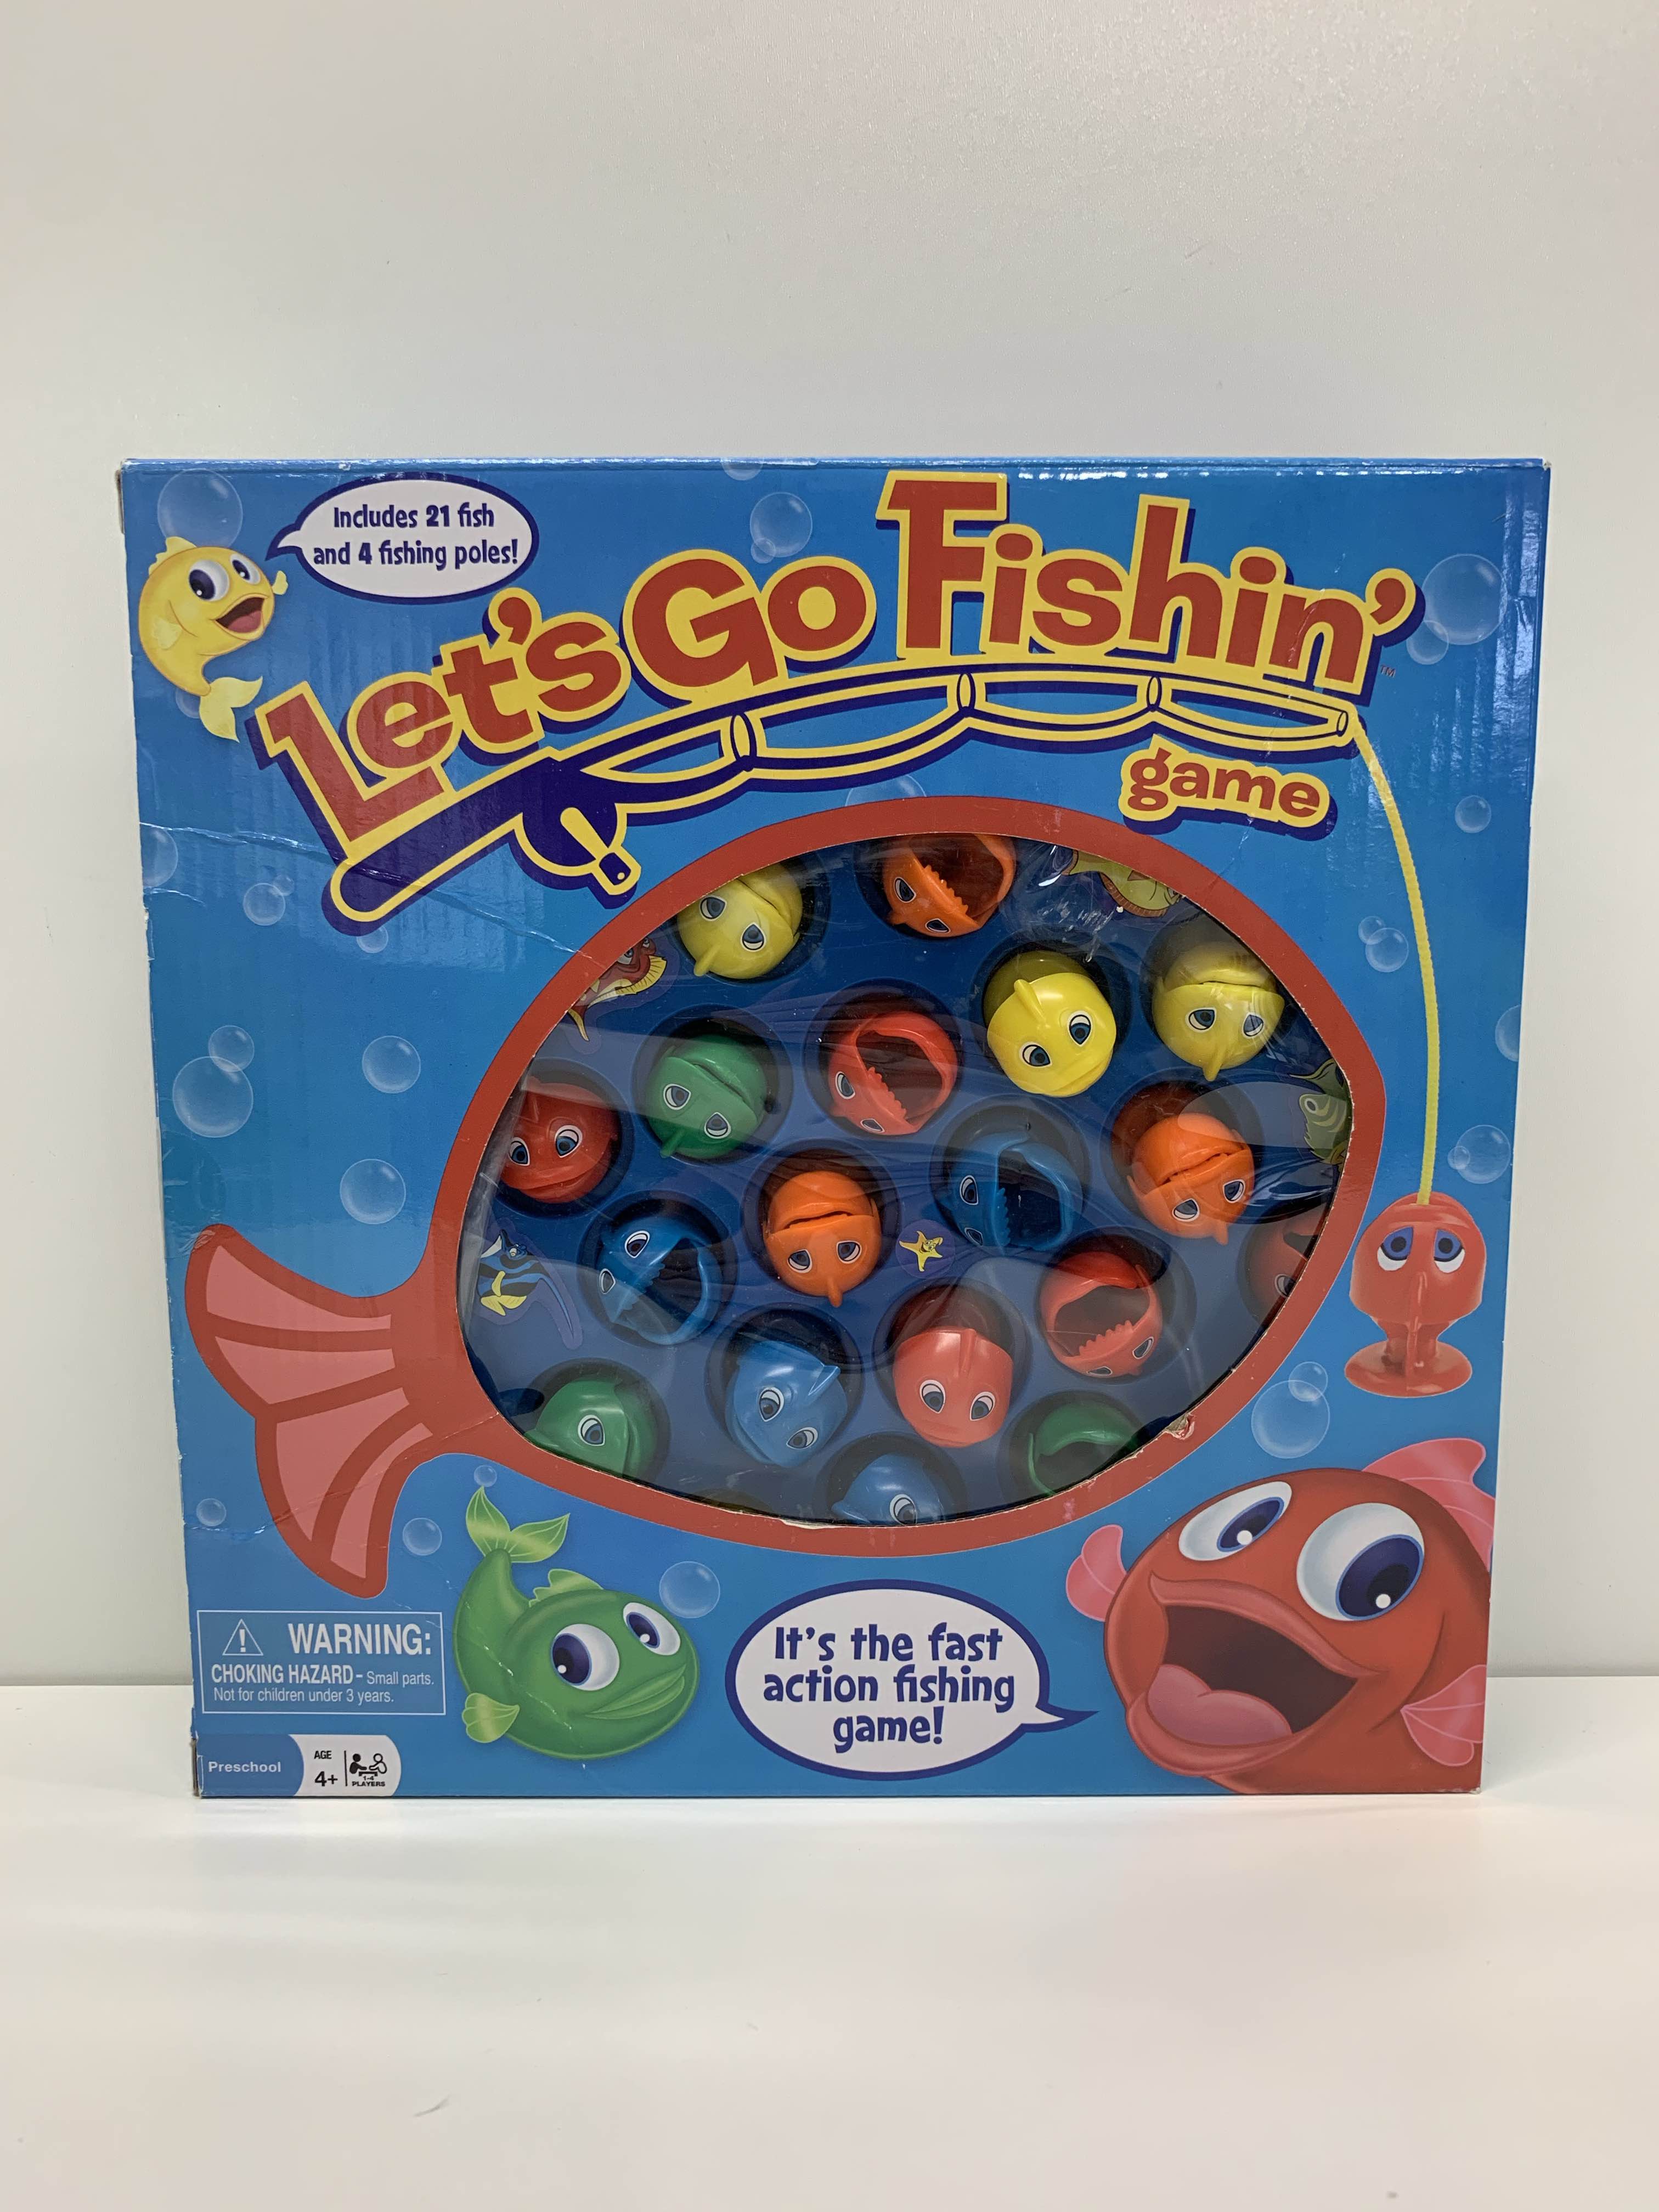 Let's Go Fishin' Game by Pressman – The Original Fast-Action